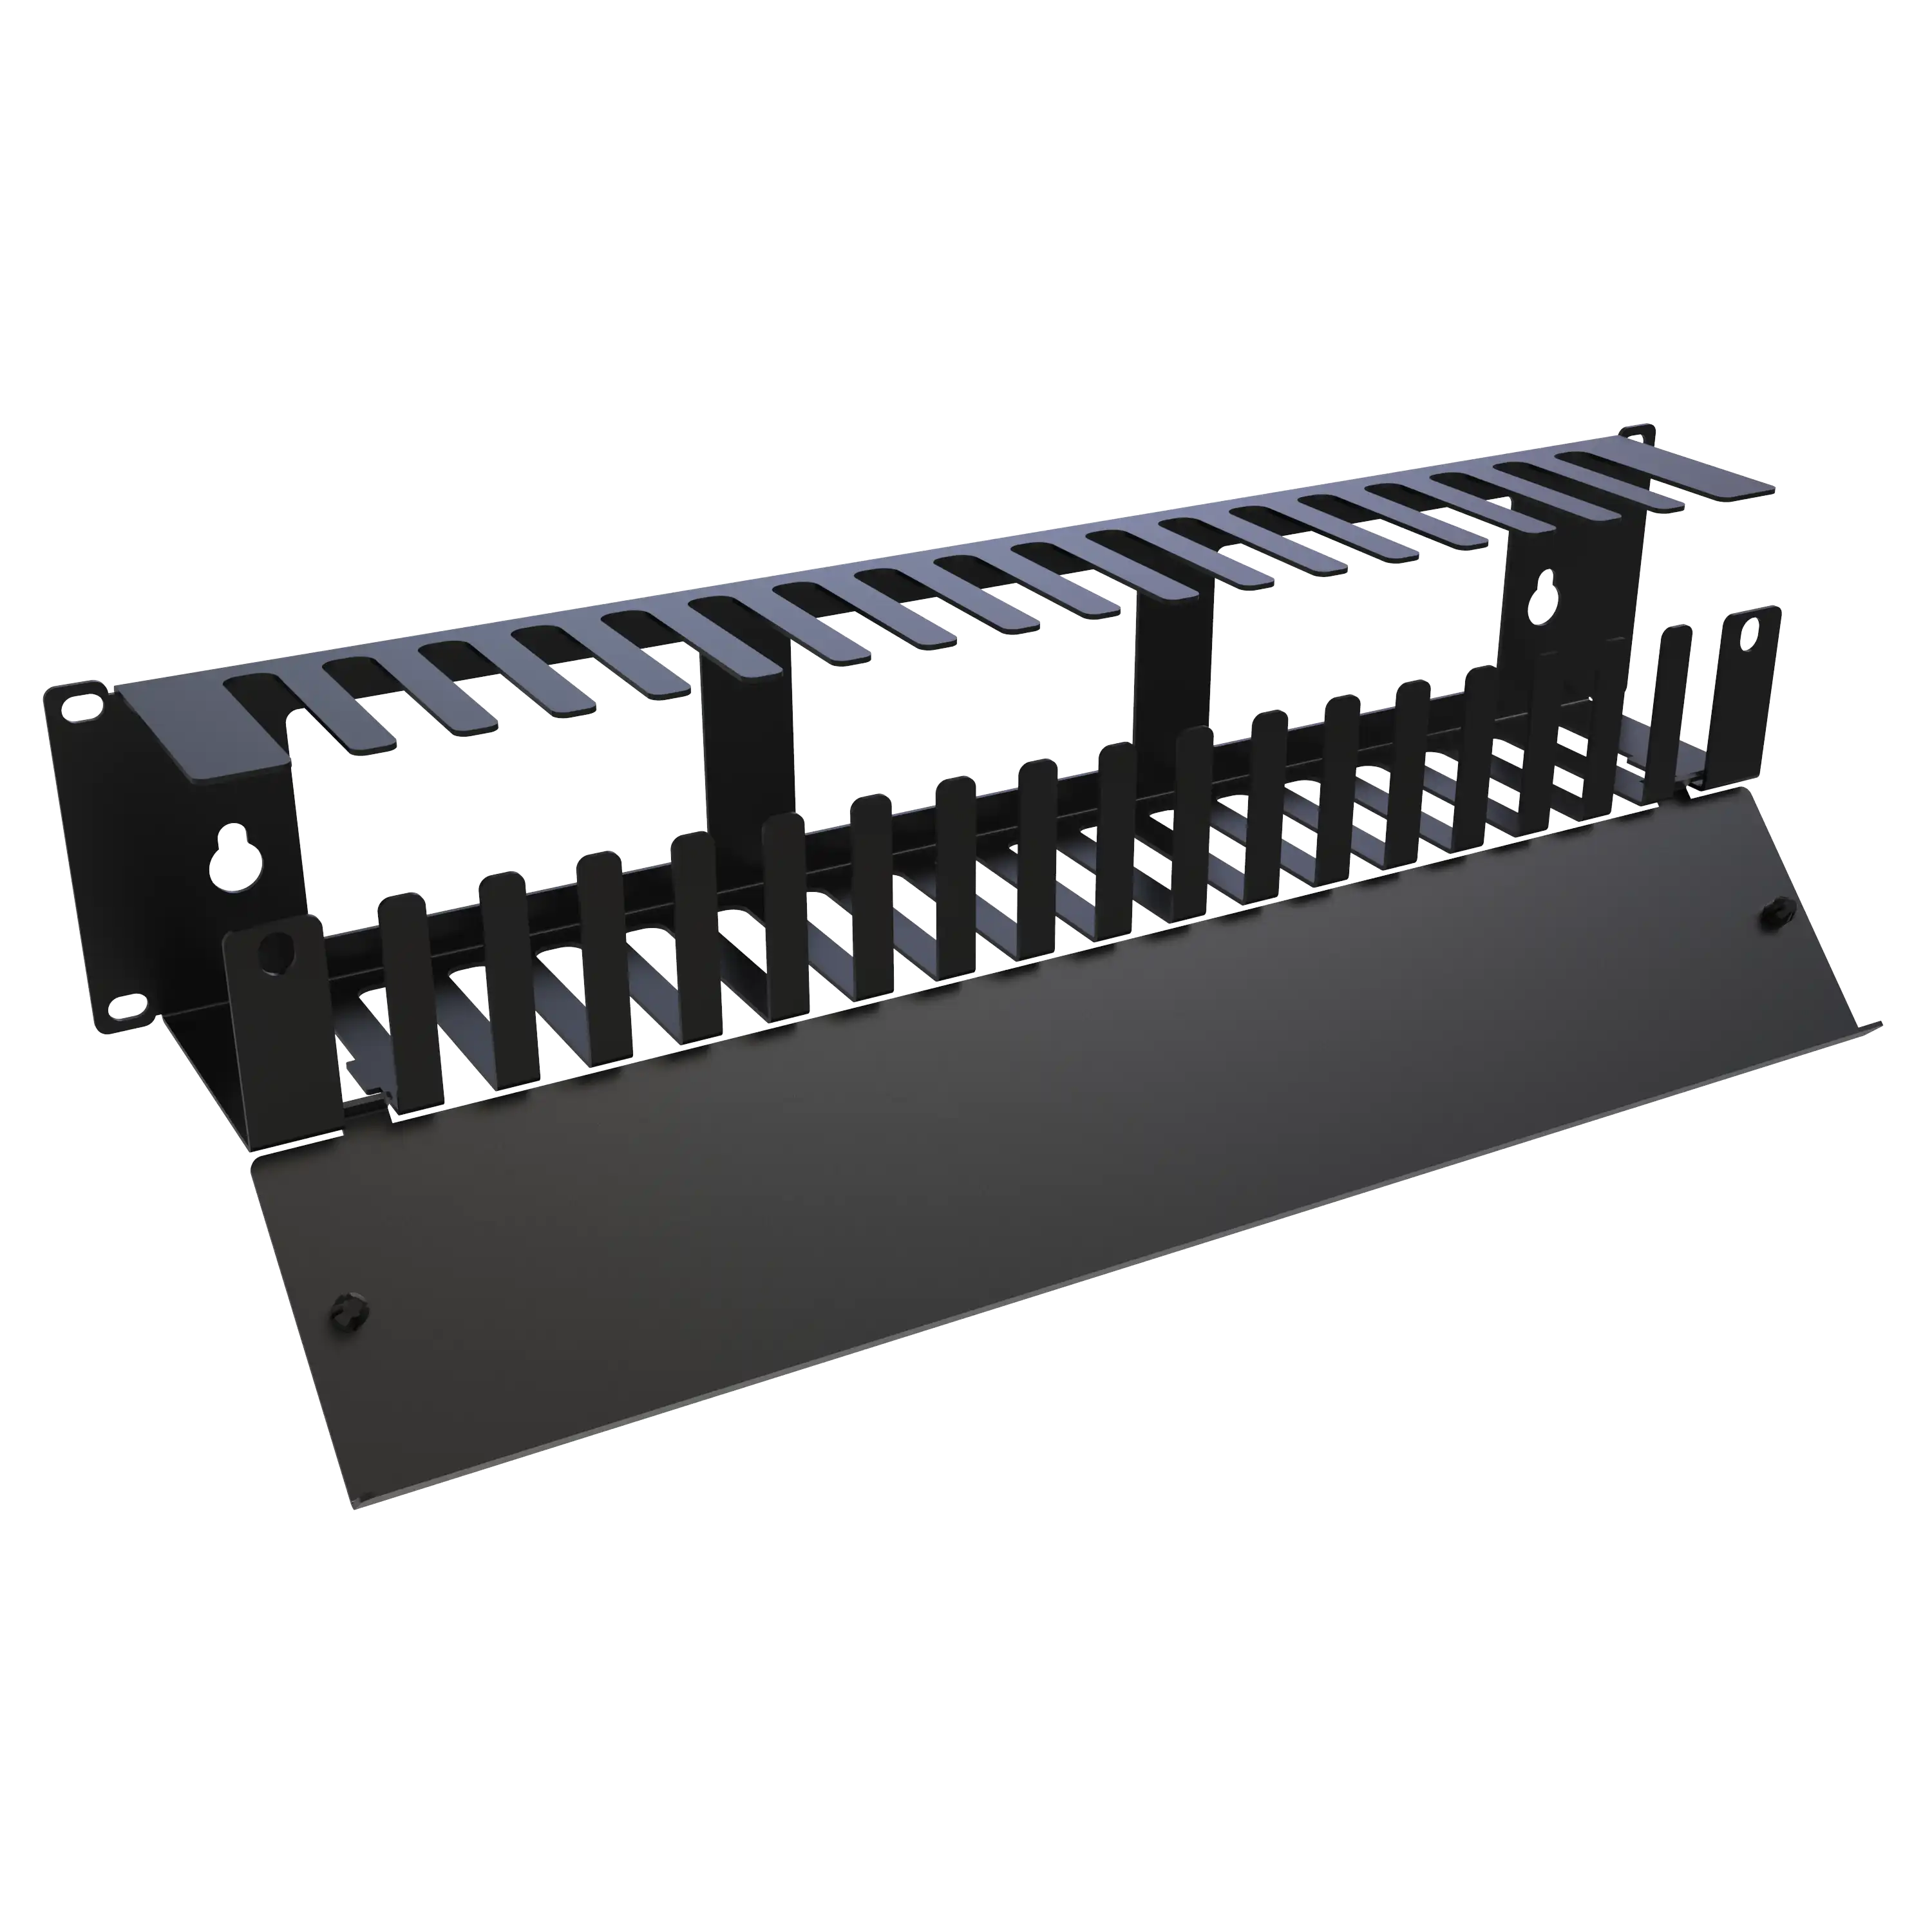 RB-HSF Series - Hammond Manufacturing Rack Systems - KGA Enclosures Ltd